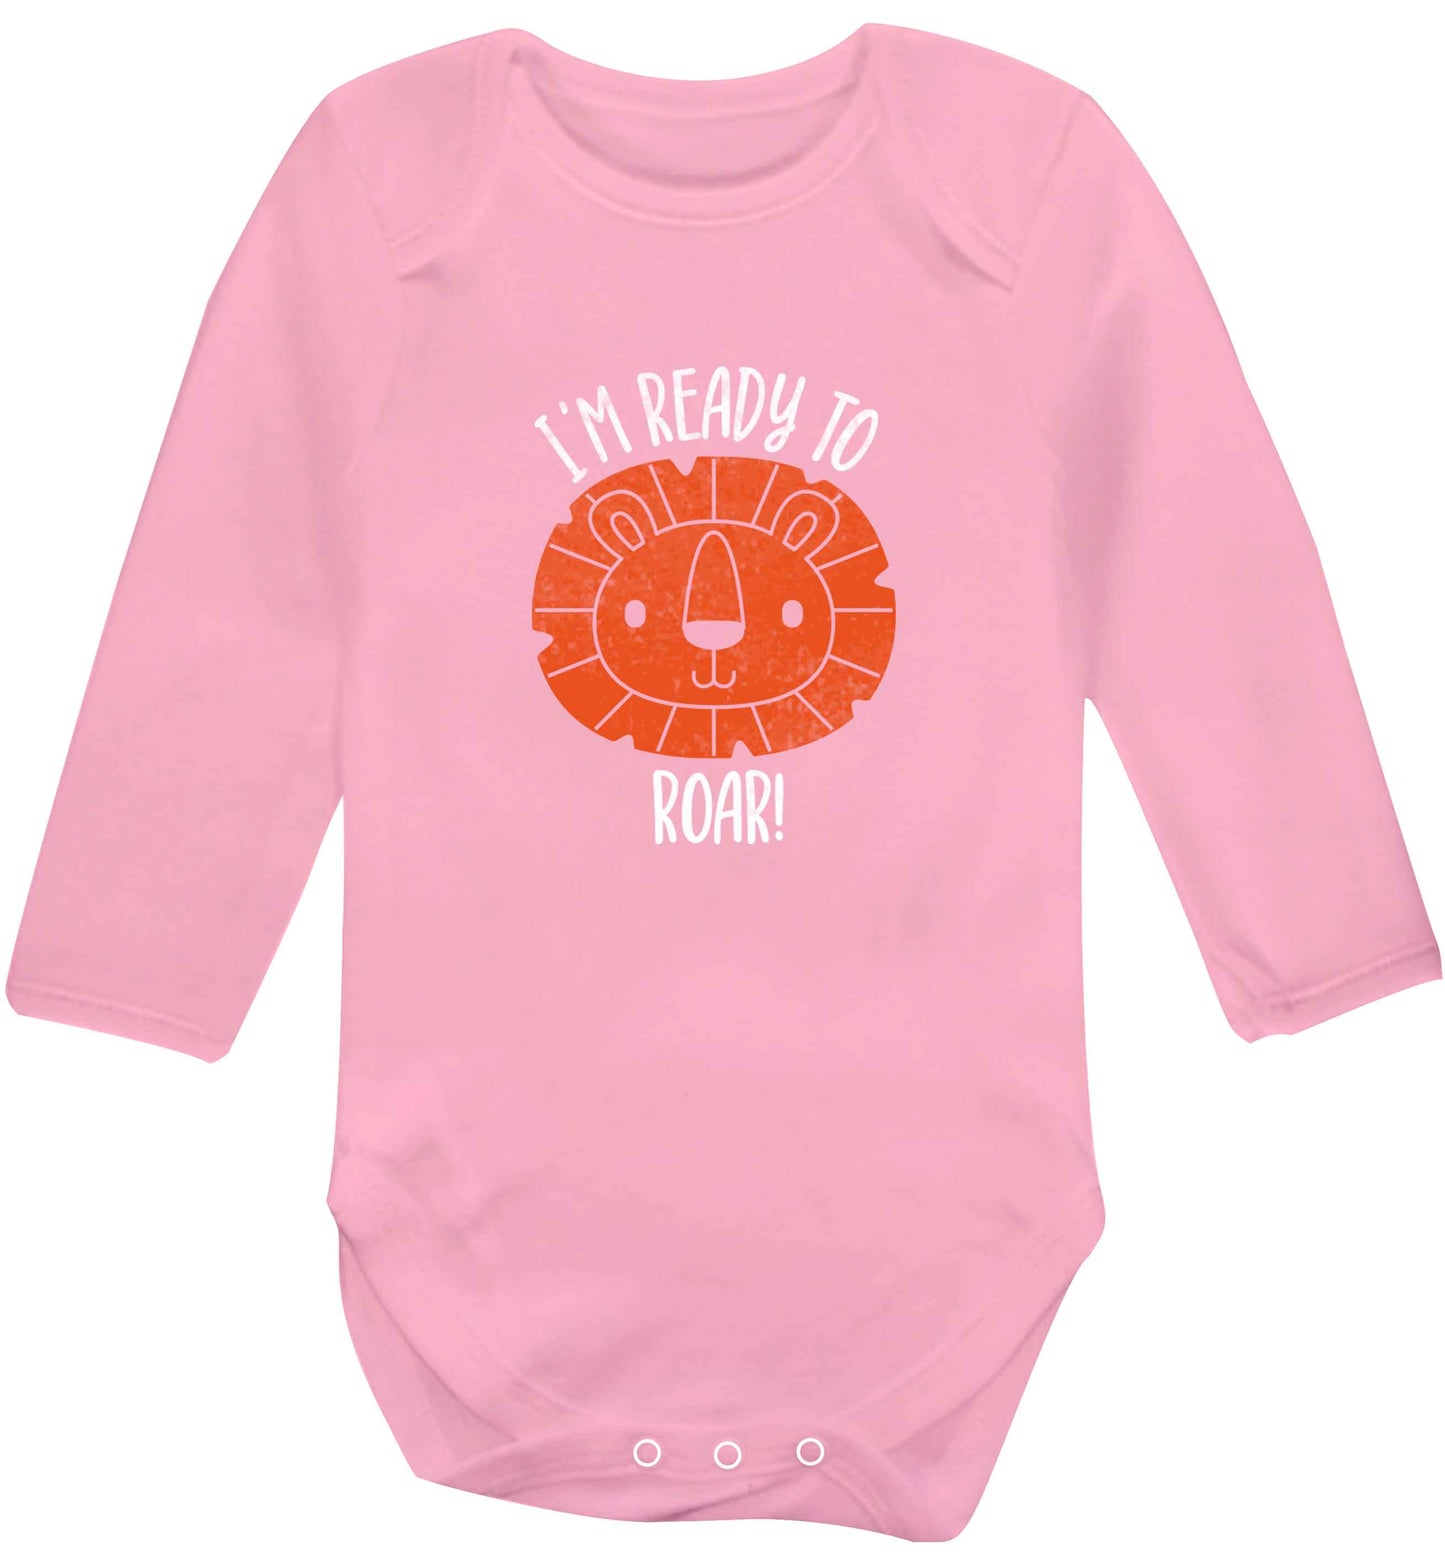 I'm ready to rawr baby vest long sleeved pale pink 6-12 months